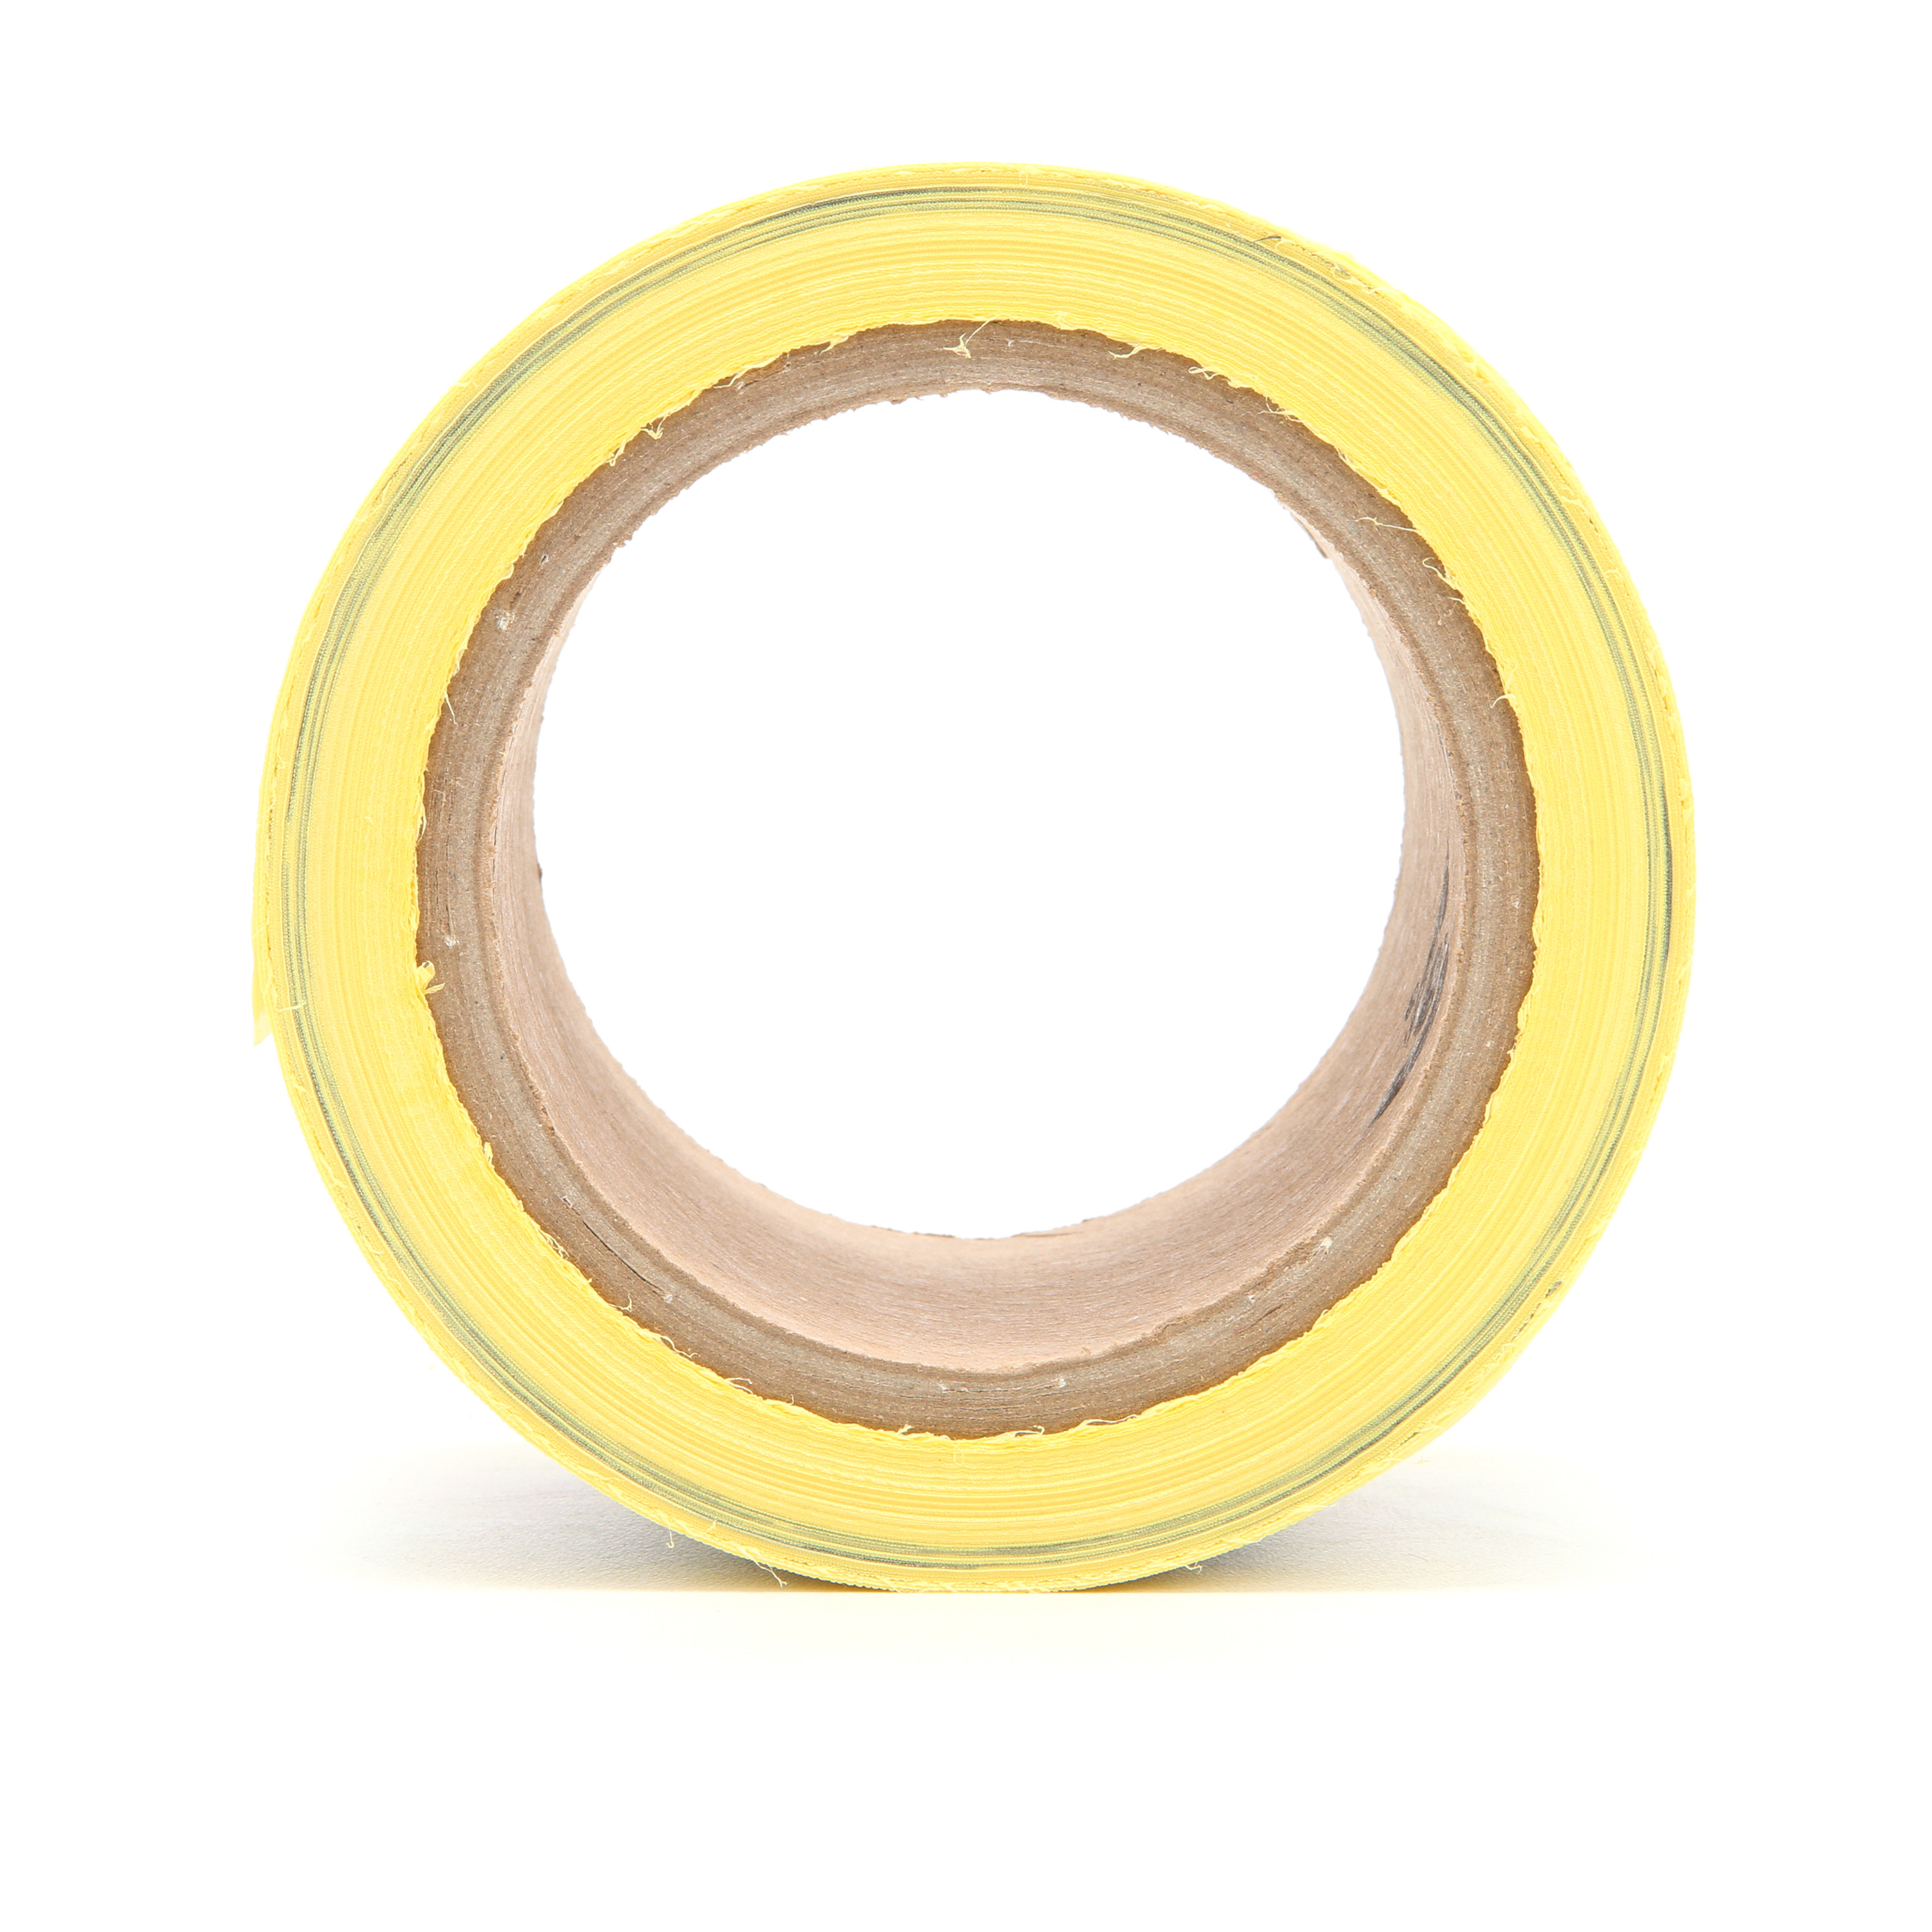 Scotch® Buried Barricade Tape 374, CAUTION BURIED TELEPHONE LINE BELOW,
3 in x 300 ft, Yellow, 16 rolls/Case